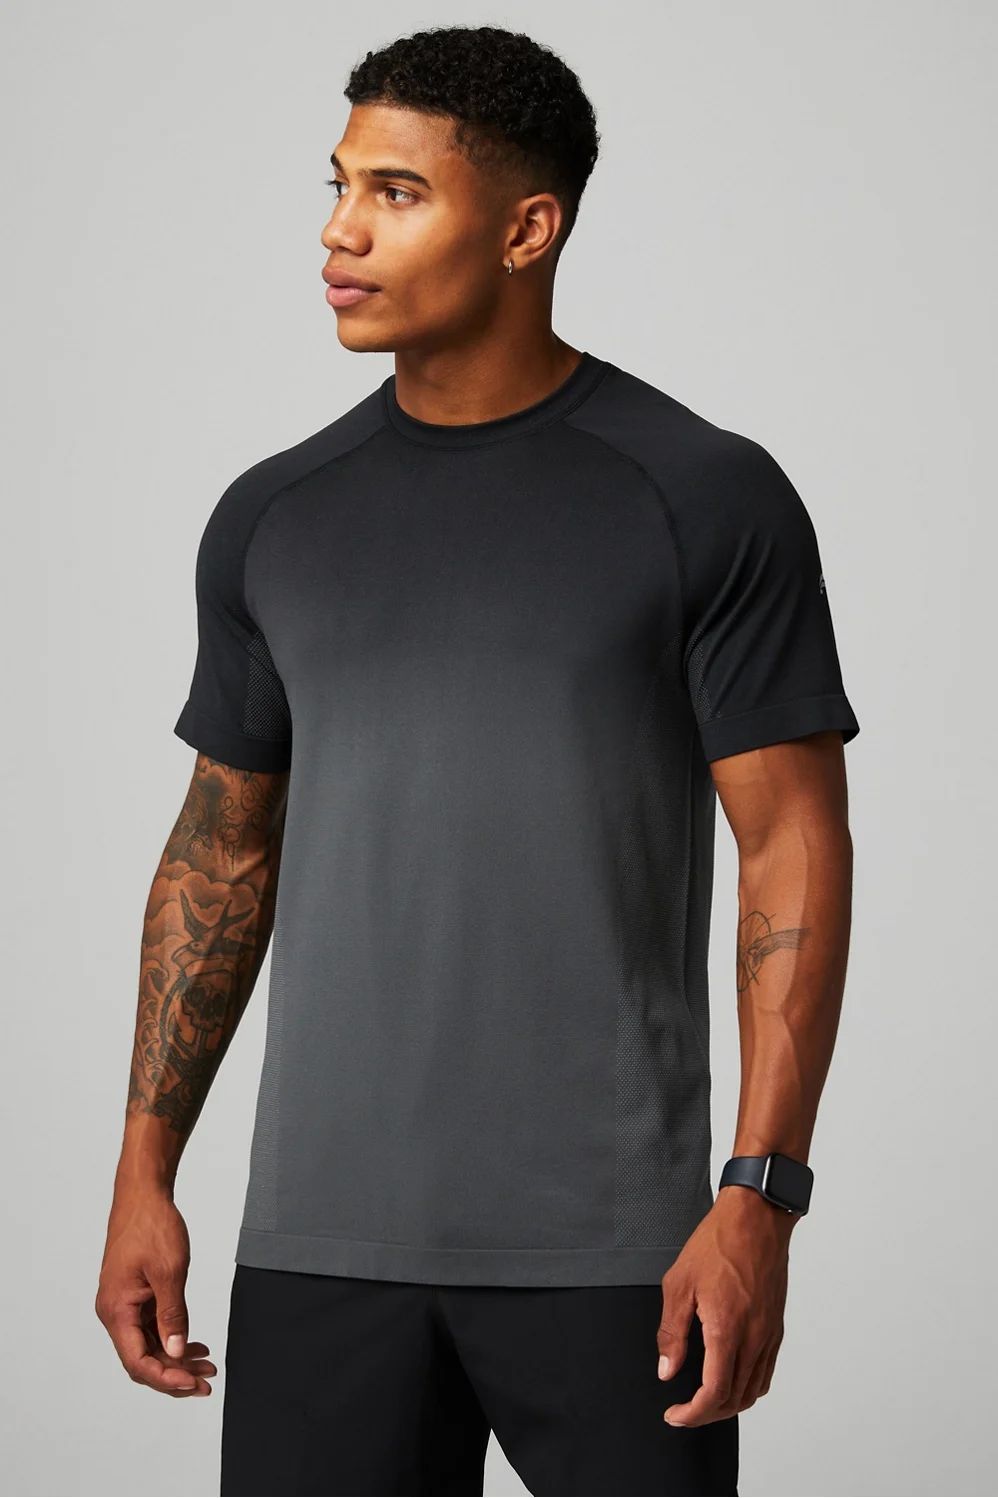 The Training Day Tee | Fabletics - North America